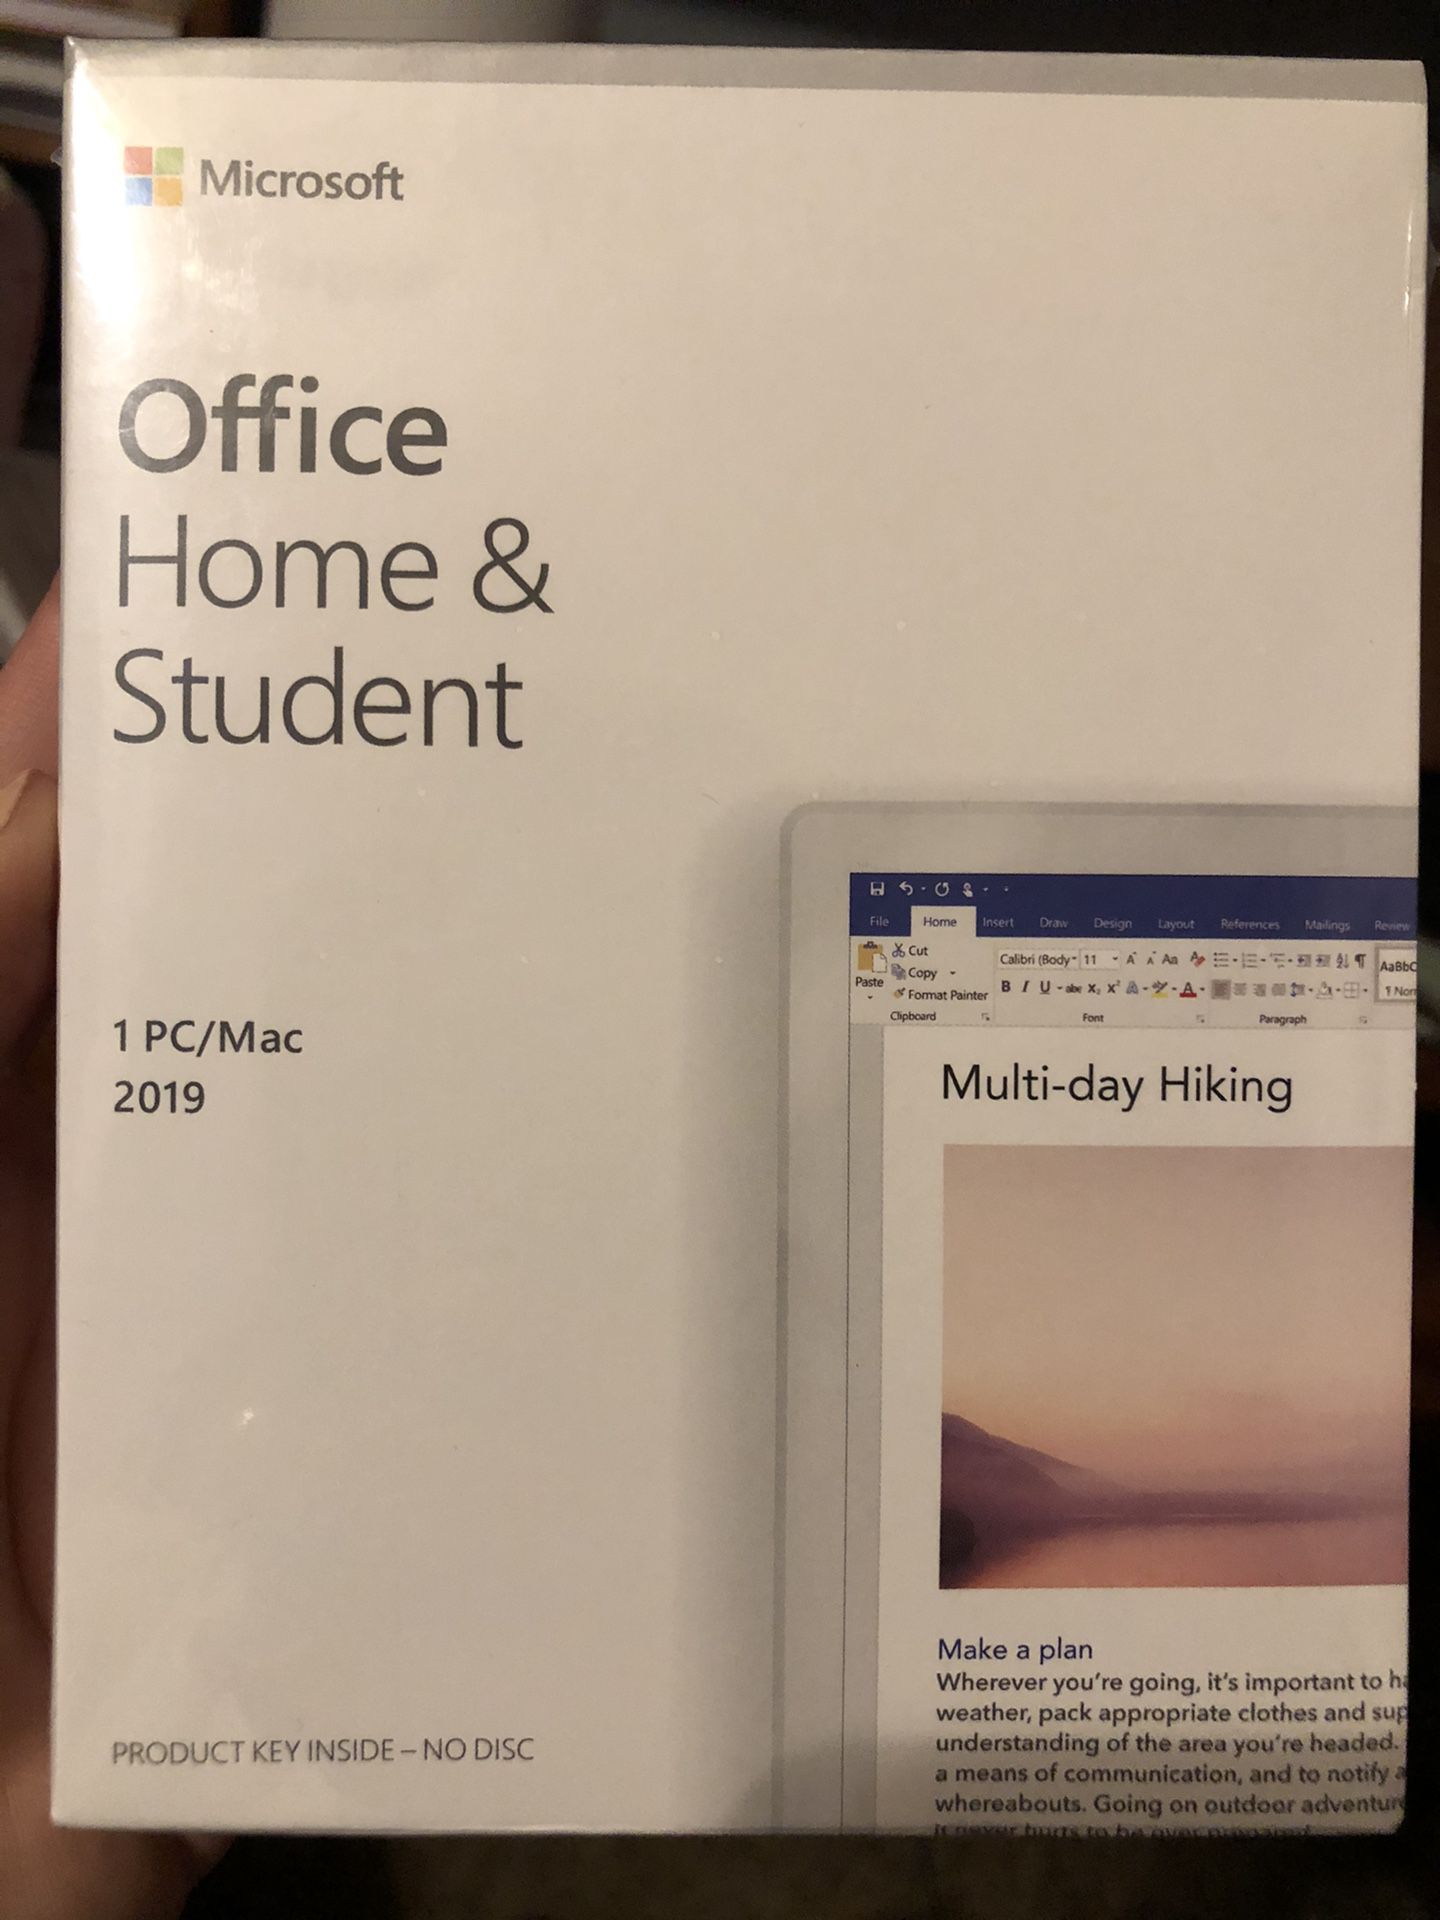 Microsoft Office Software Home & Student